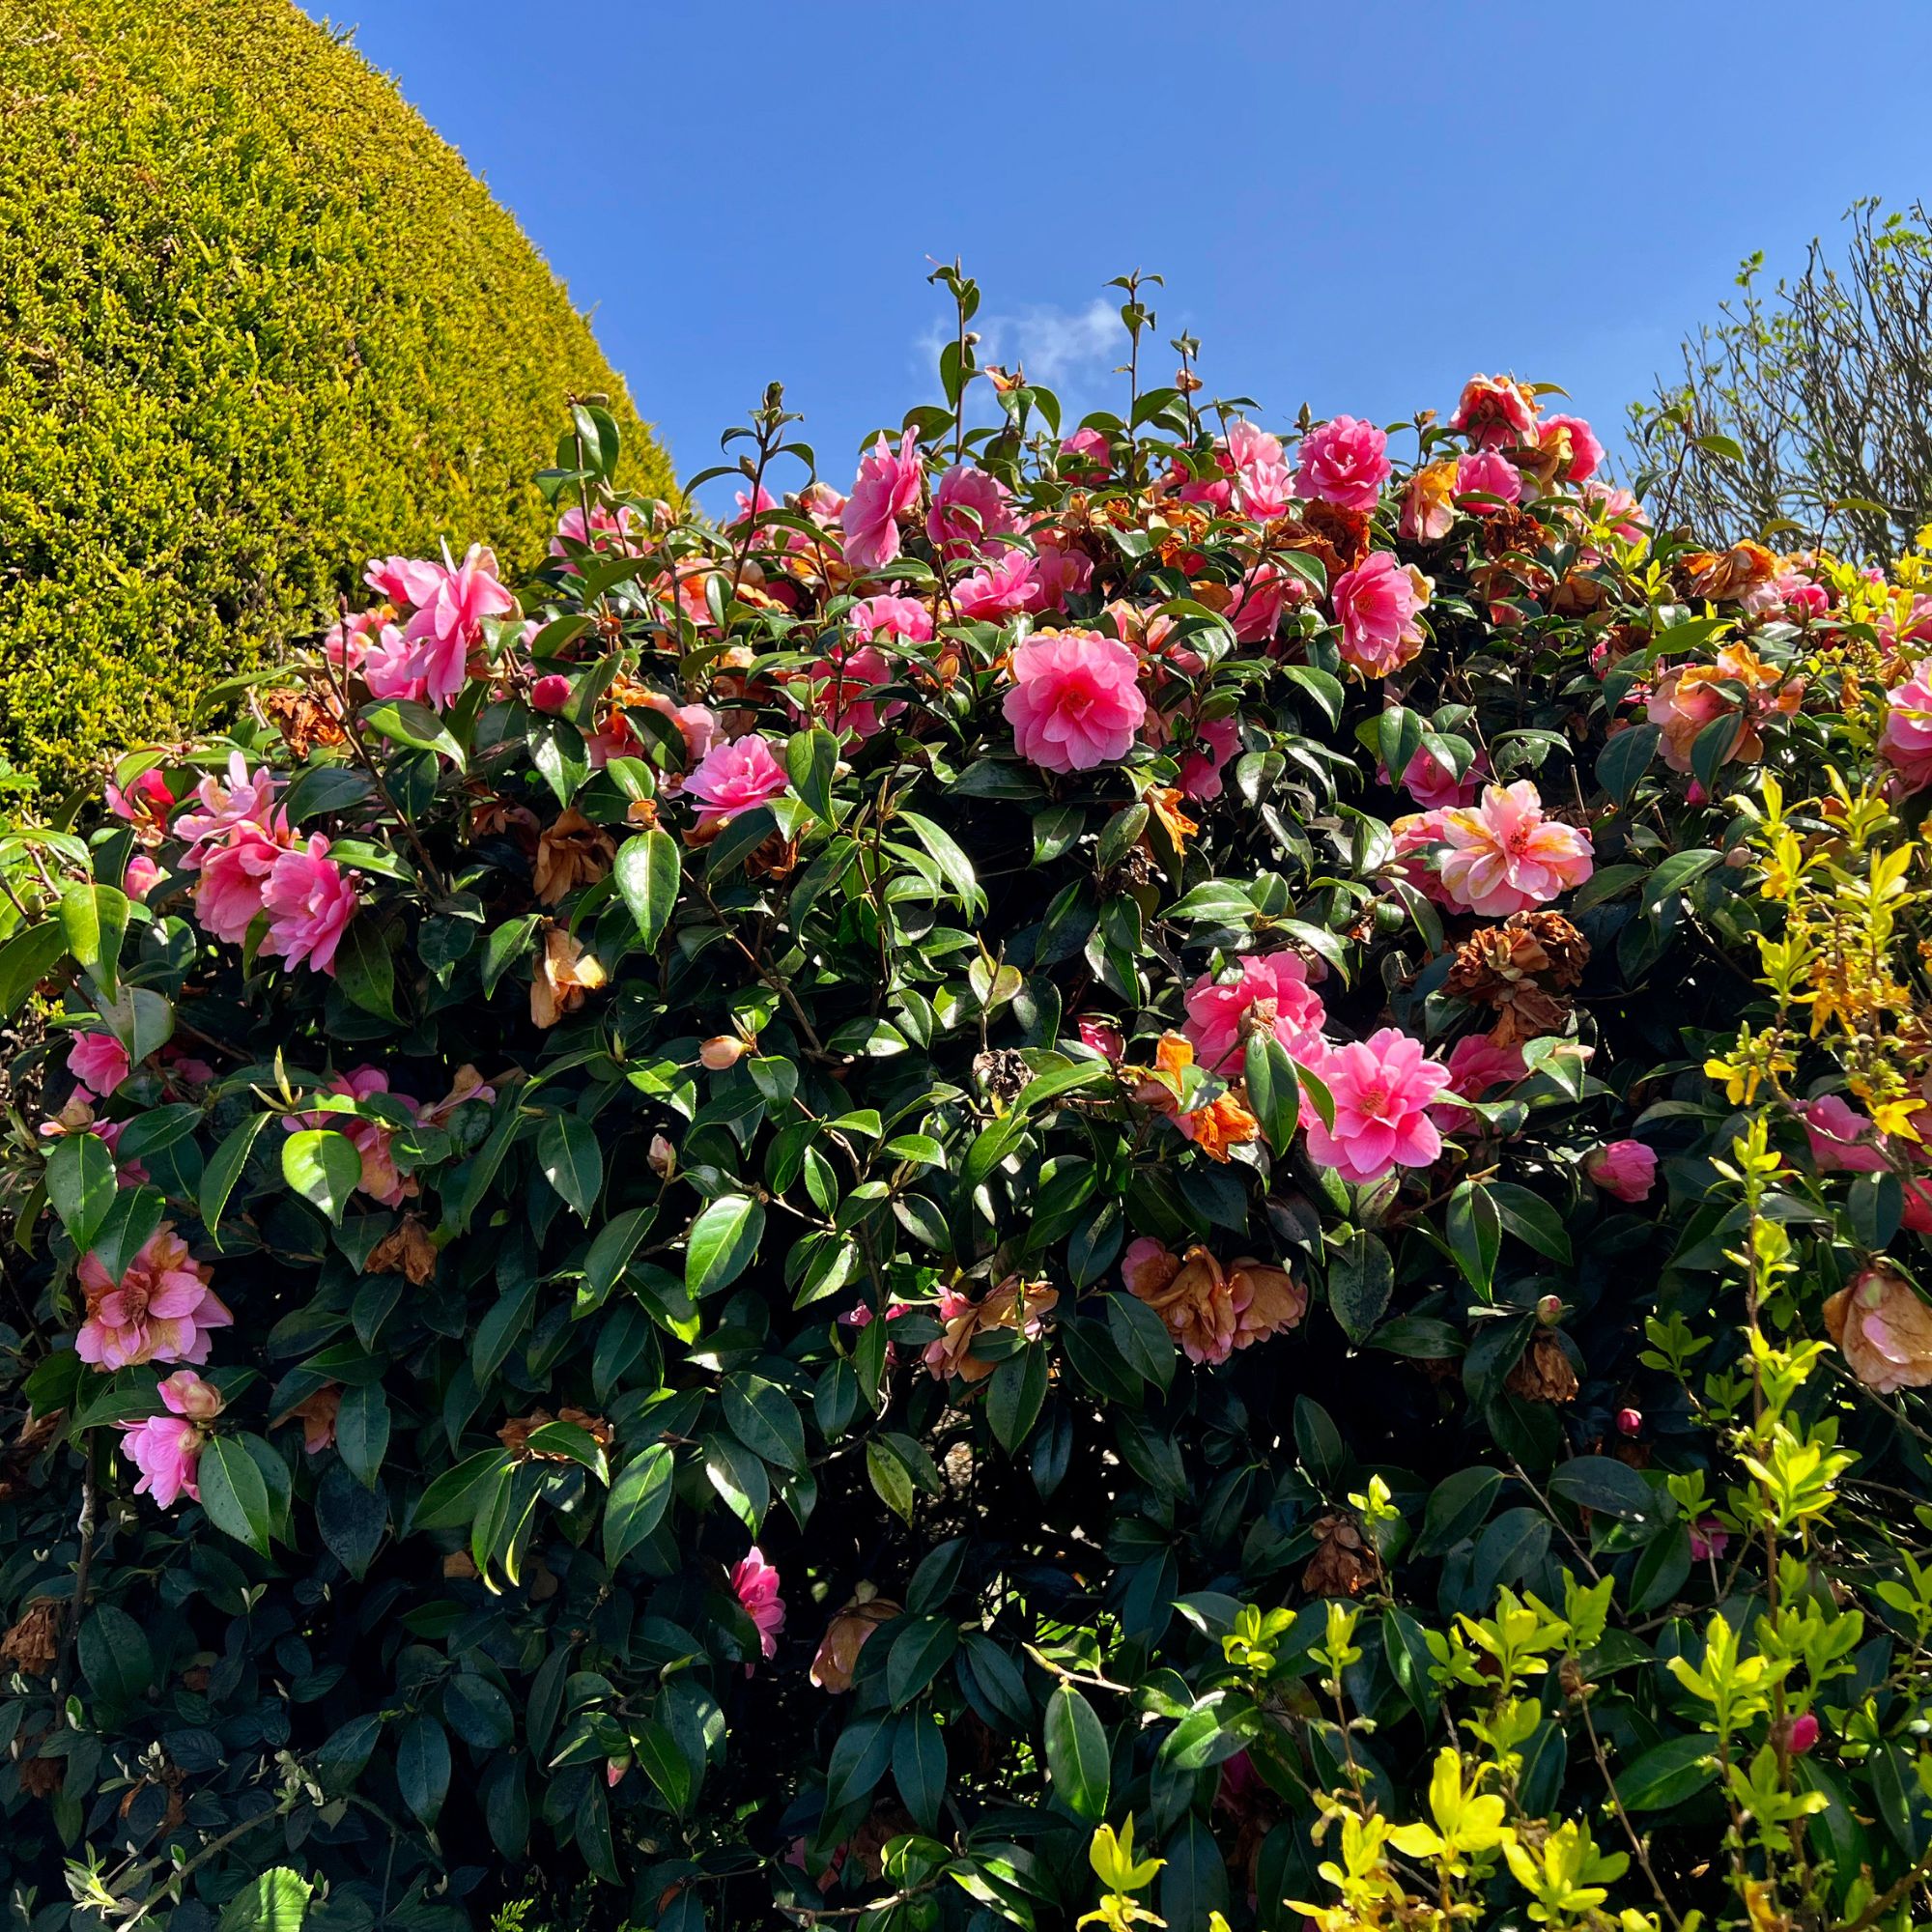 Camellias in full bloom against a blue sky